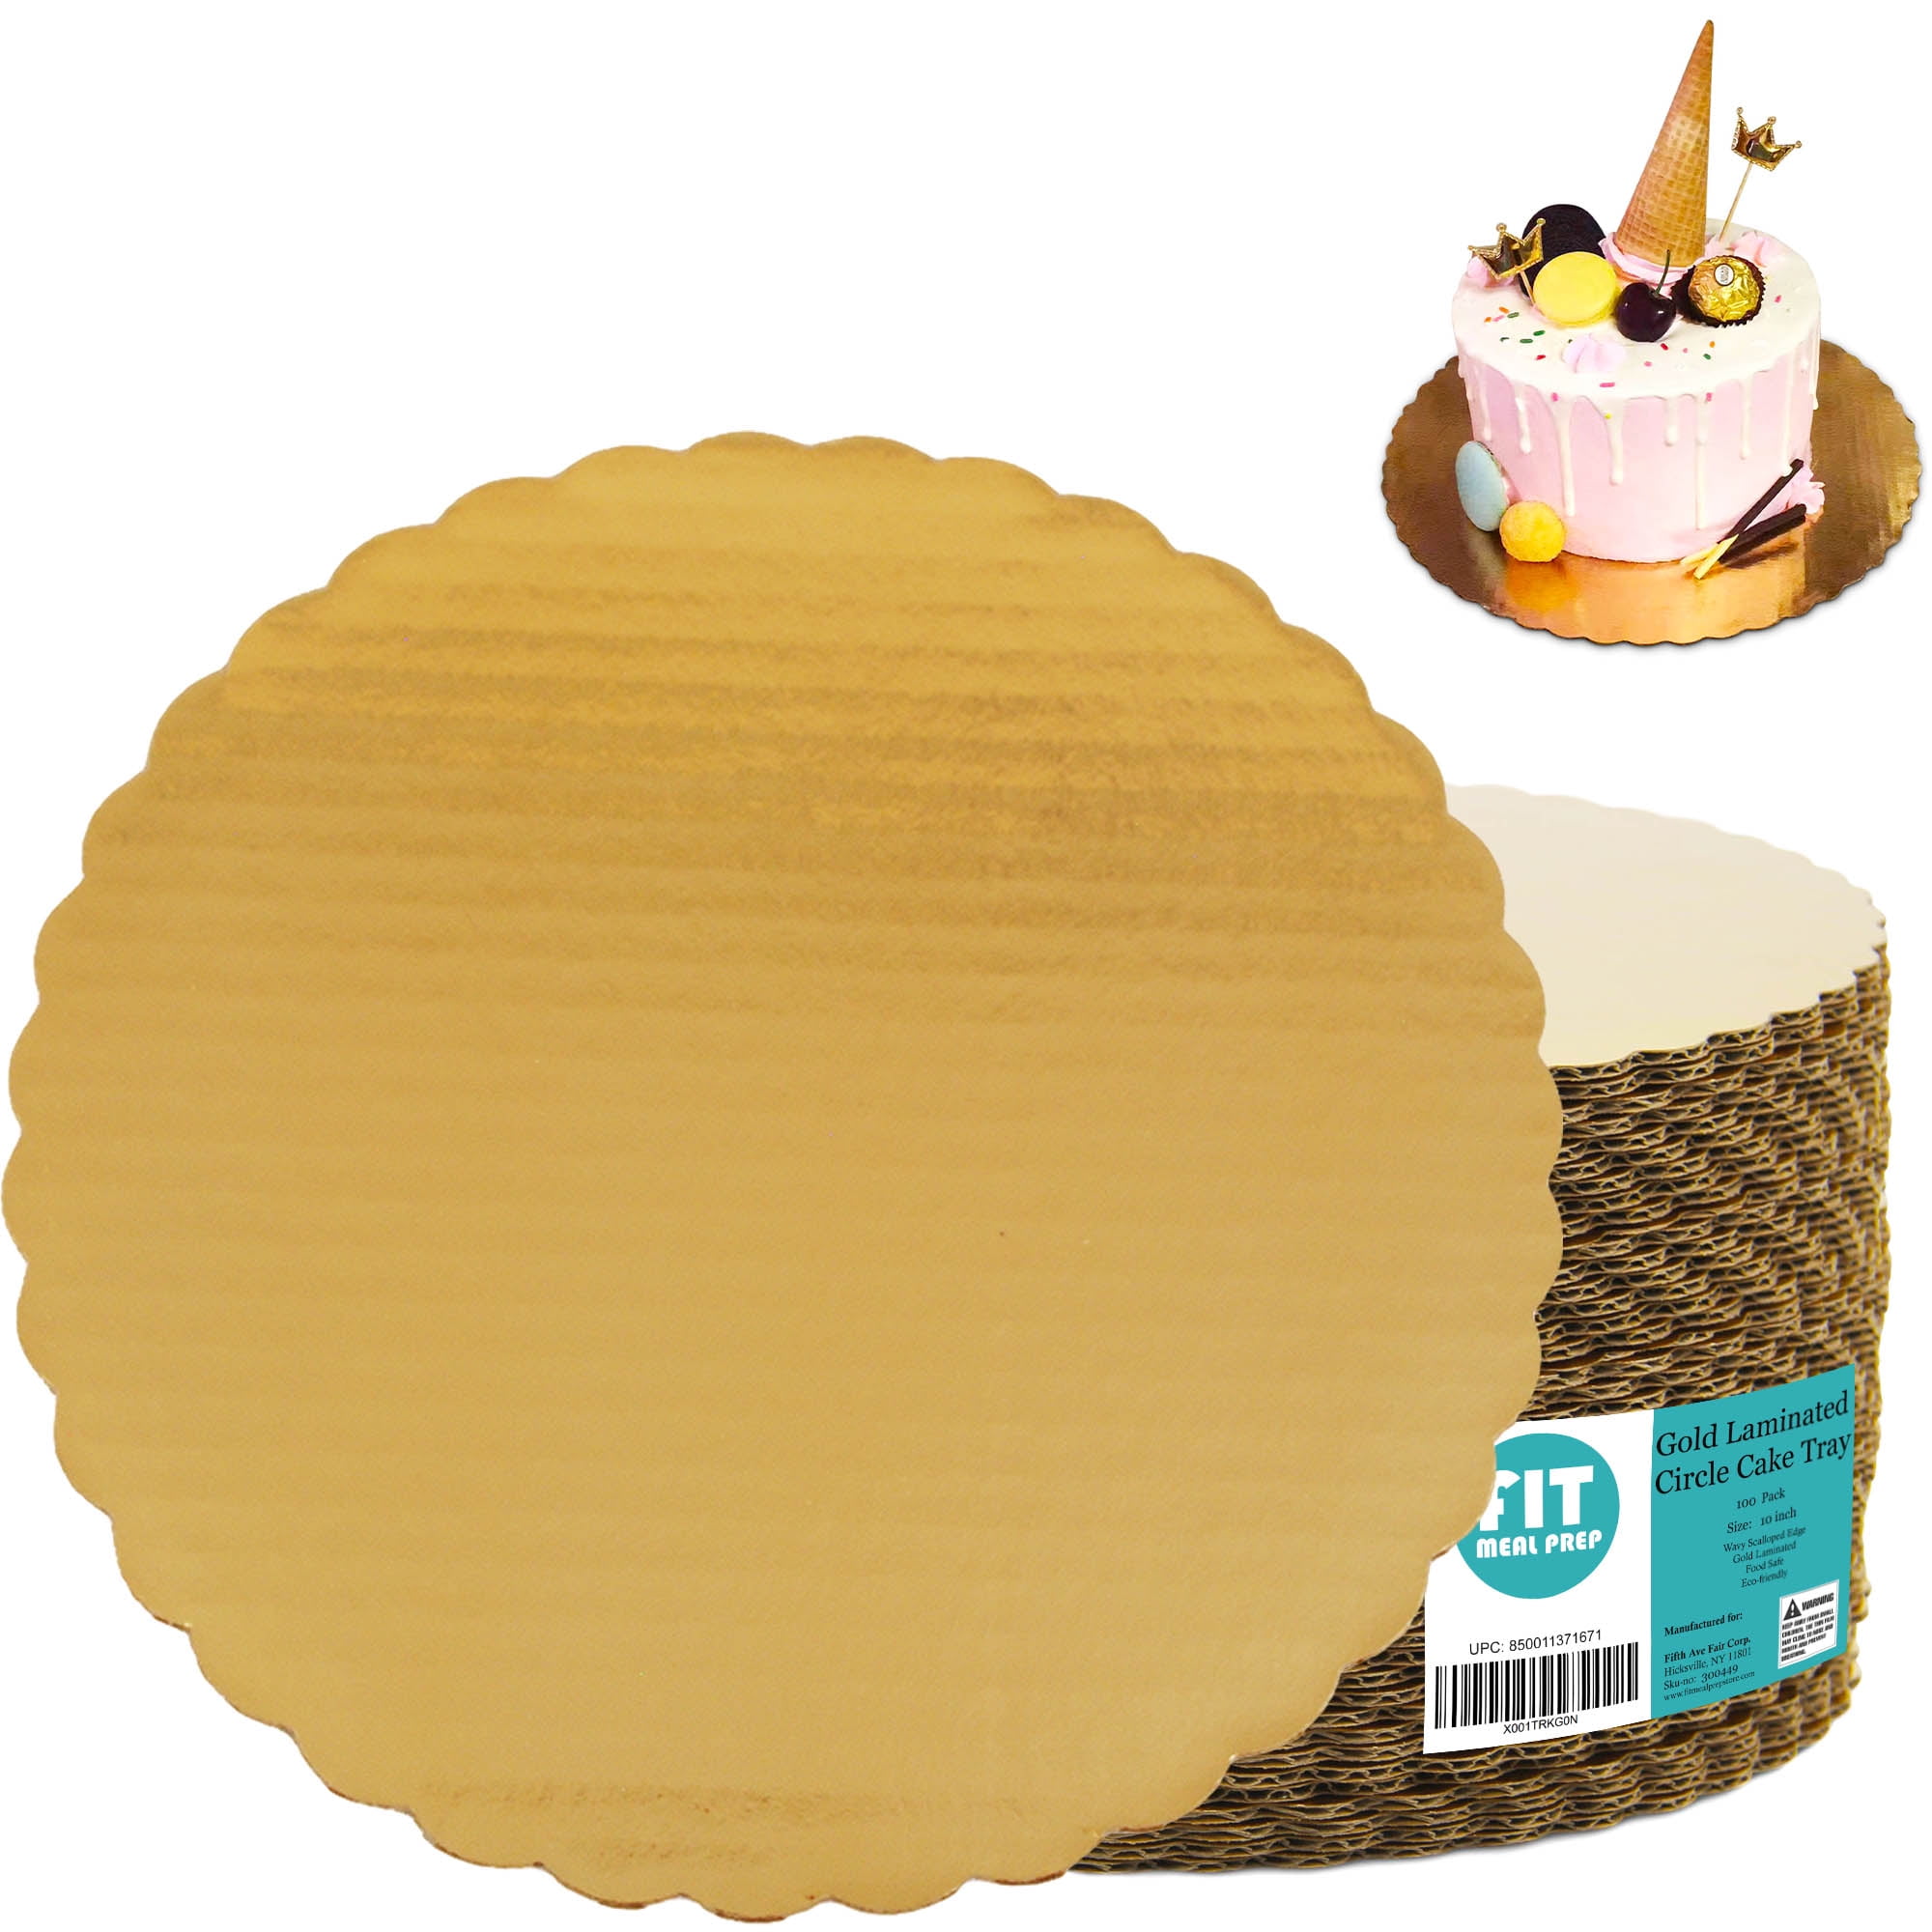 SafePro 10RGS 10-Inch Gold Round Scalloped Cardboard Cake Pads 100pcs 